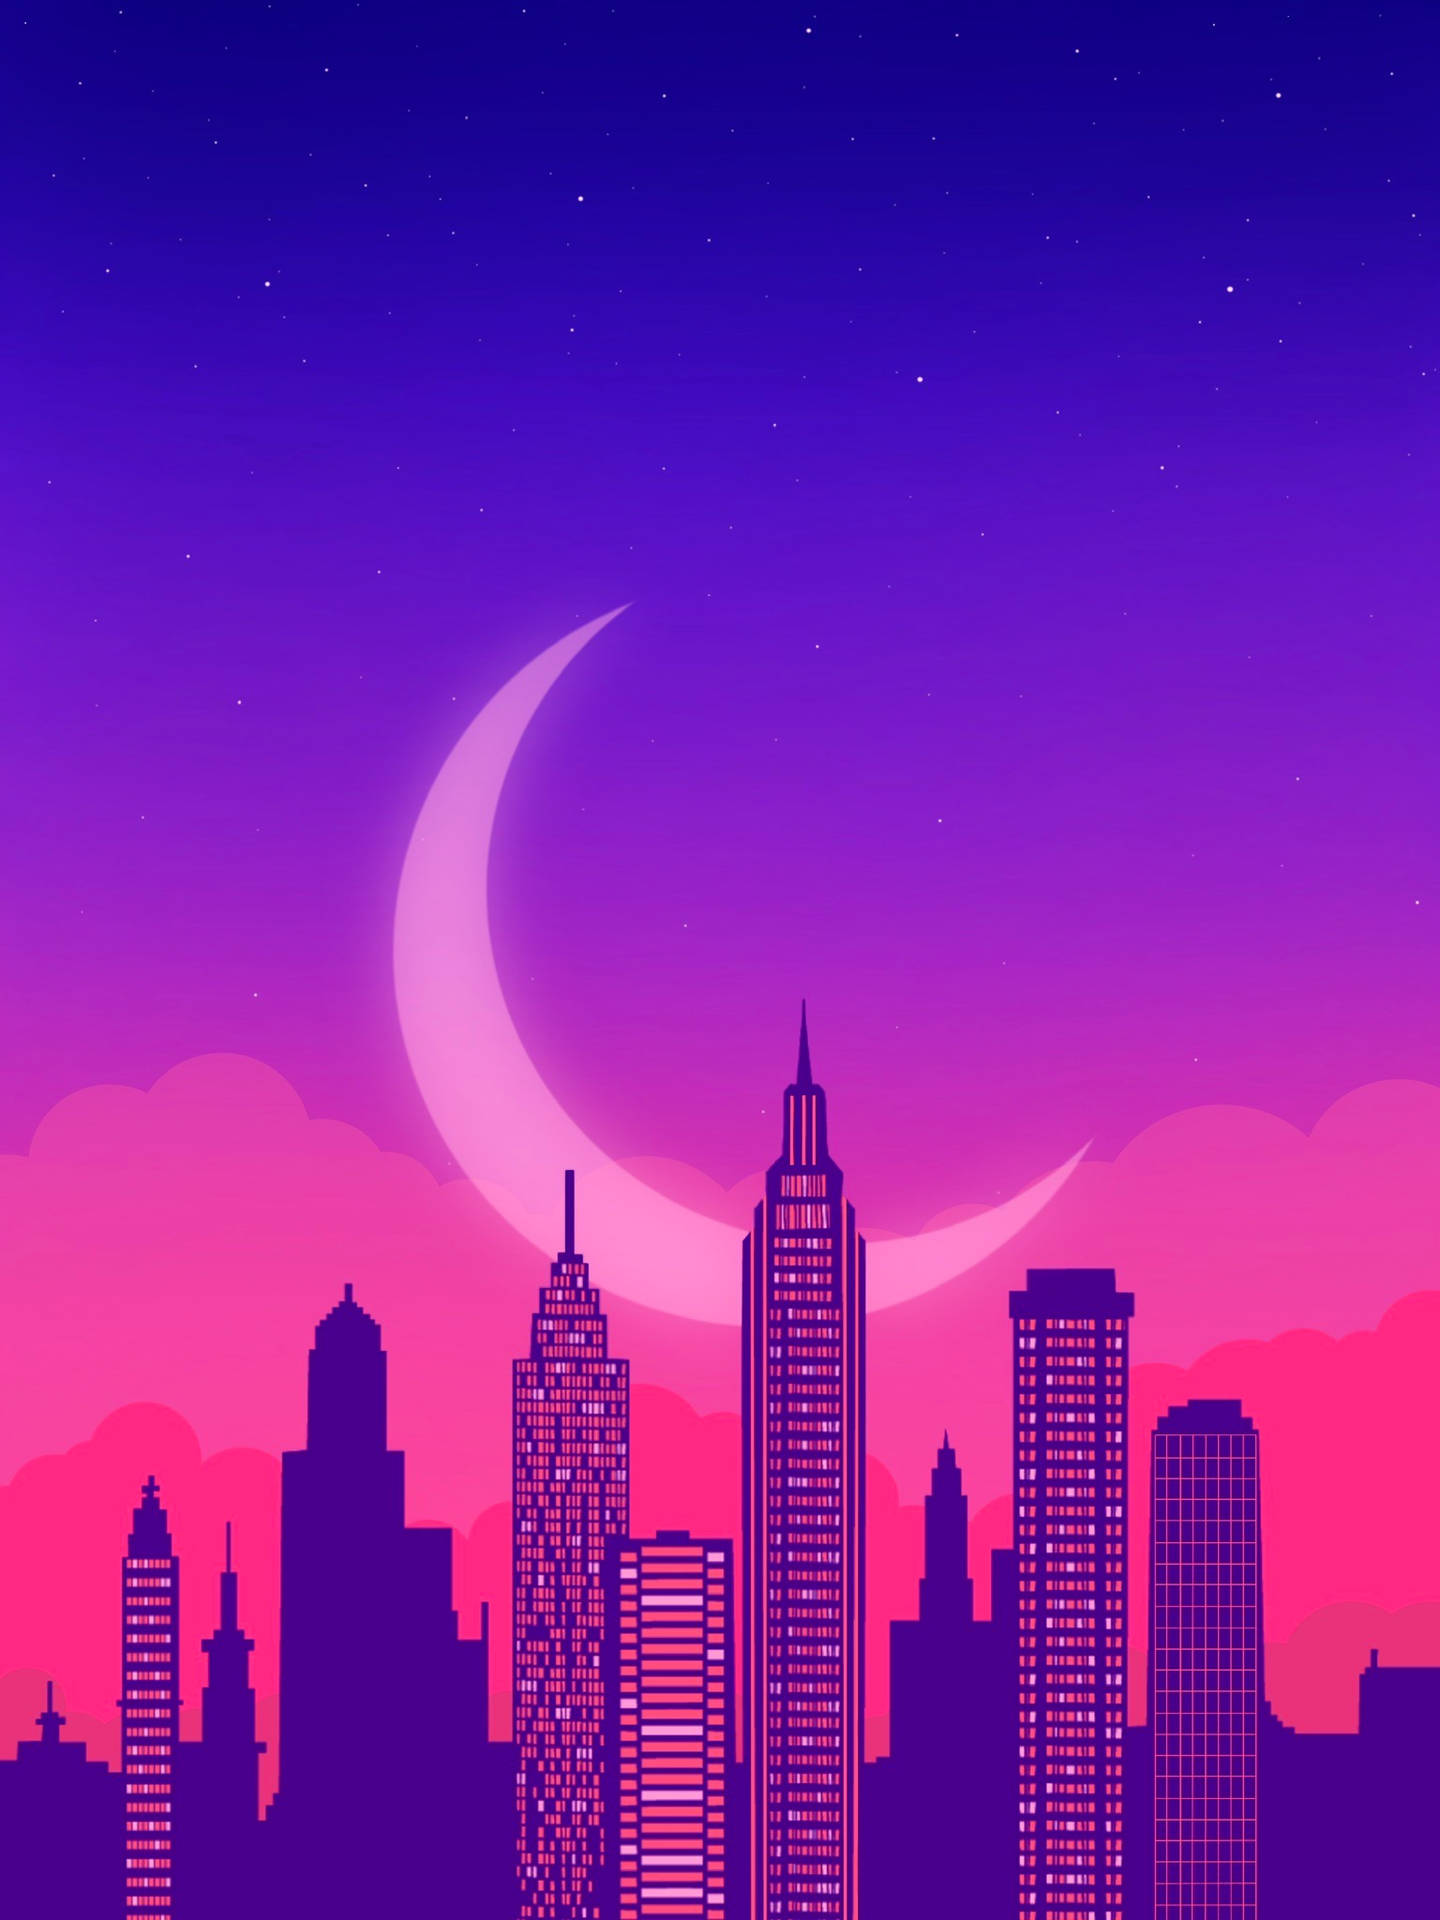 Pink And Purple Synthwave City Art Wallpaper